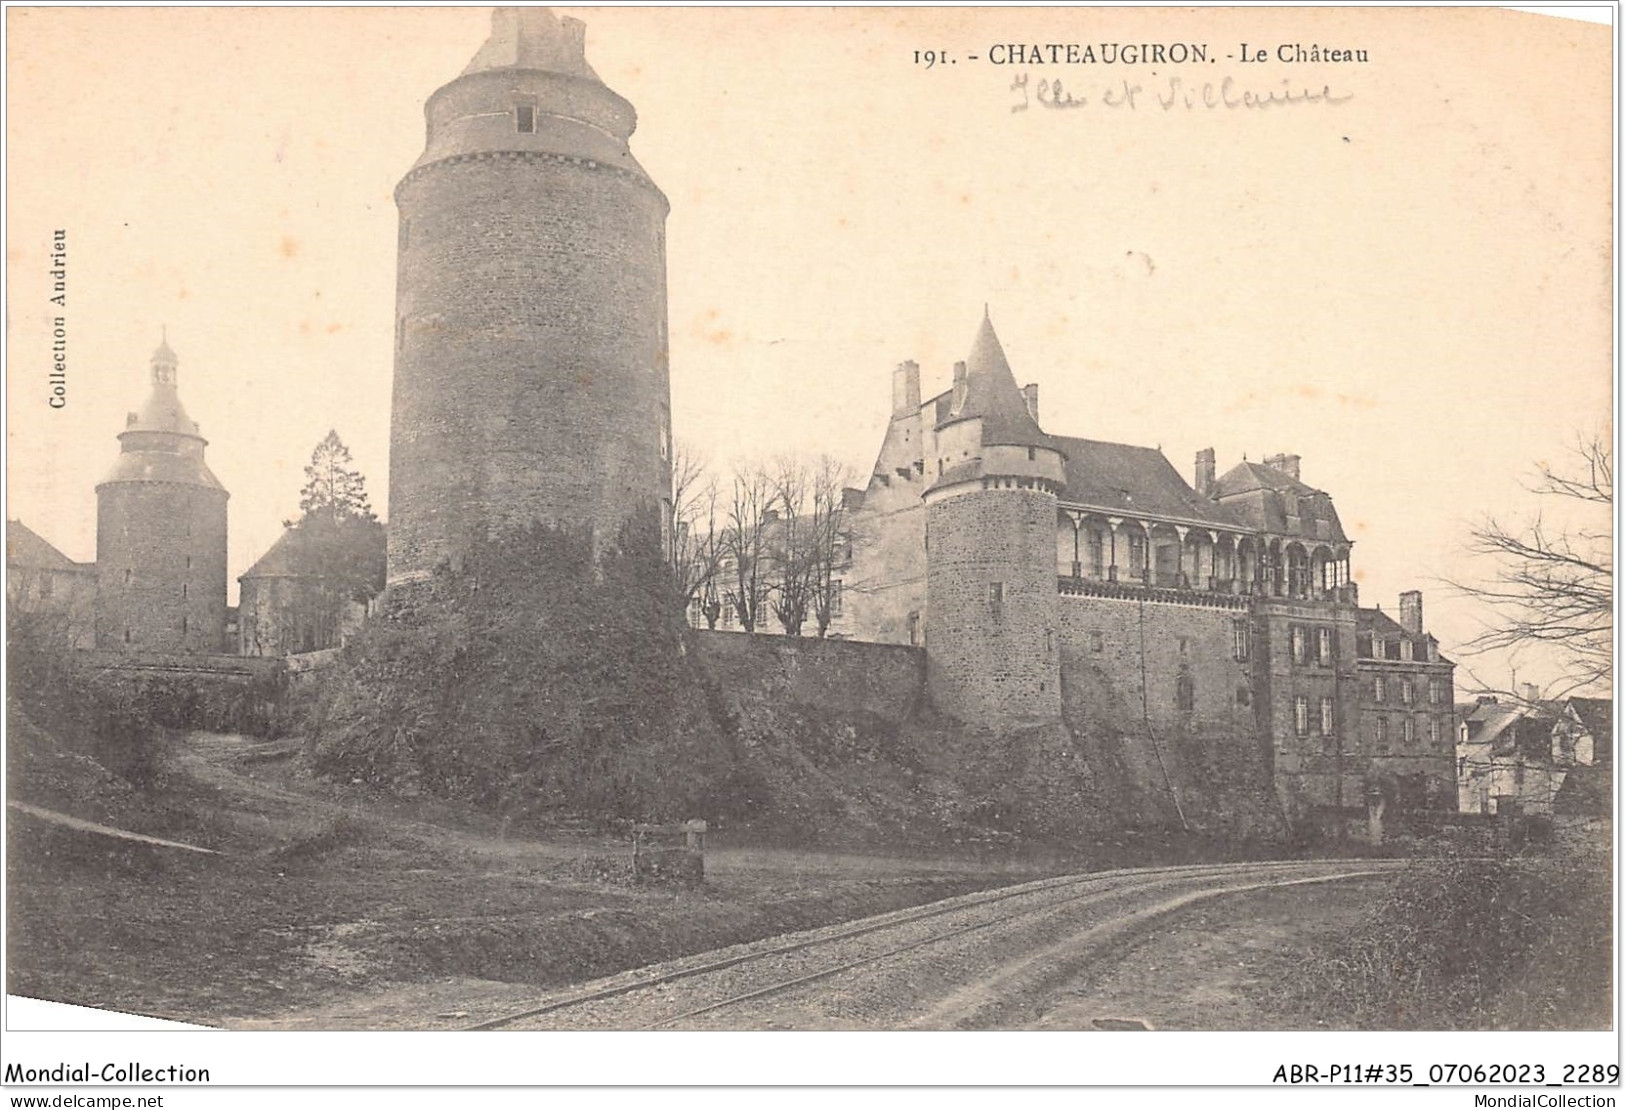 ABRP11-35-1048 - CHATEAUGIRON - Le Chateau - Châteaugiron